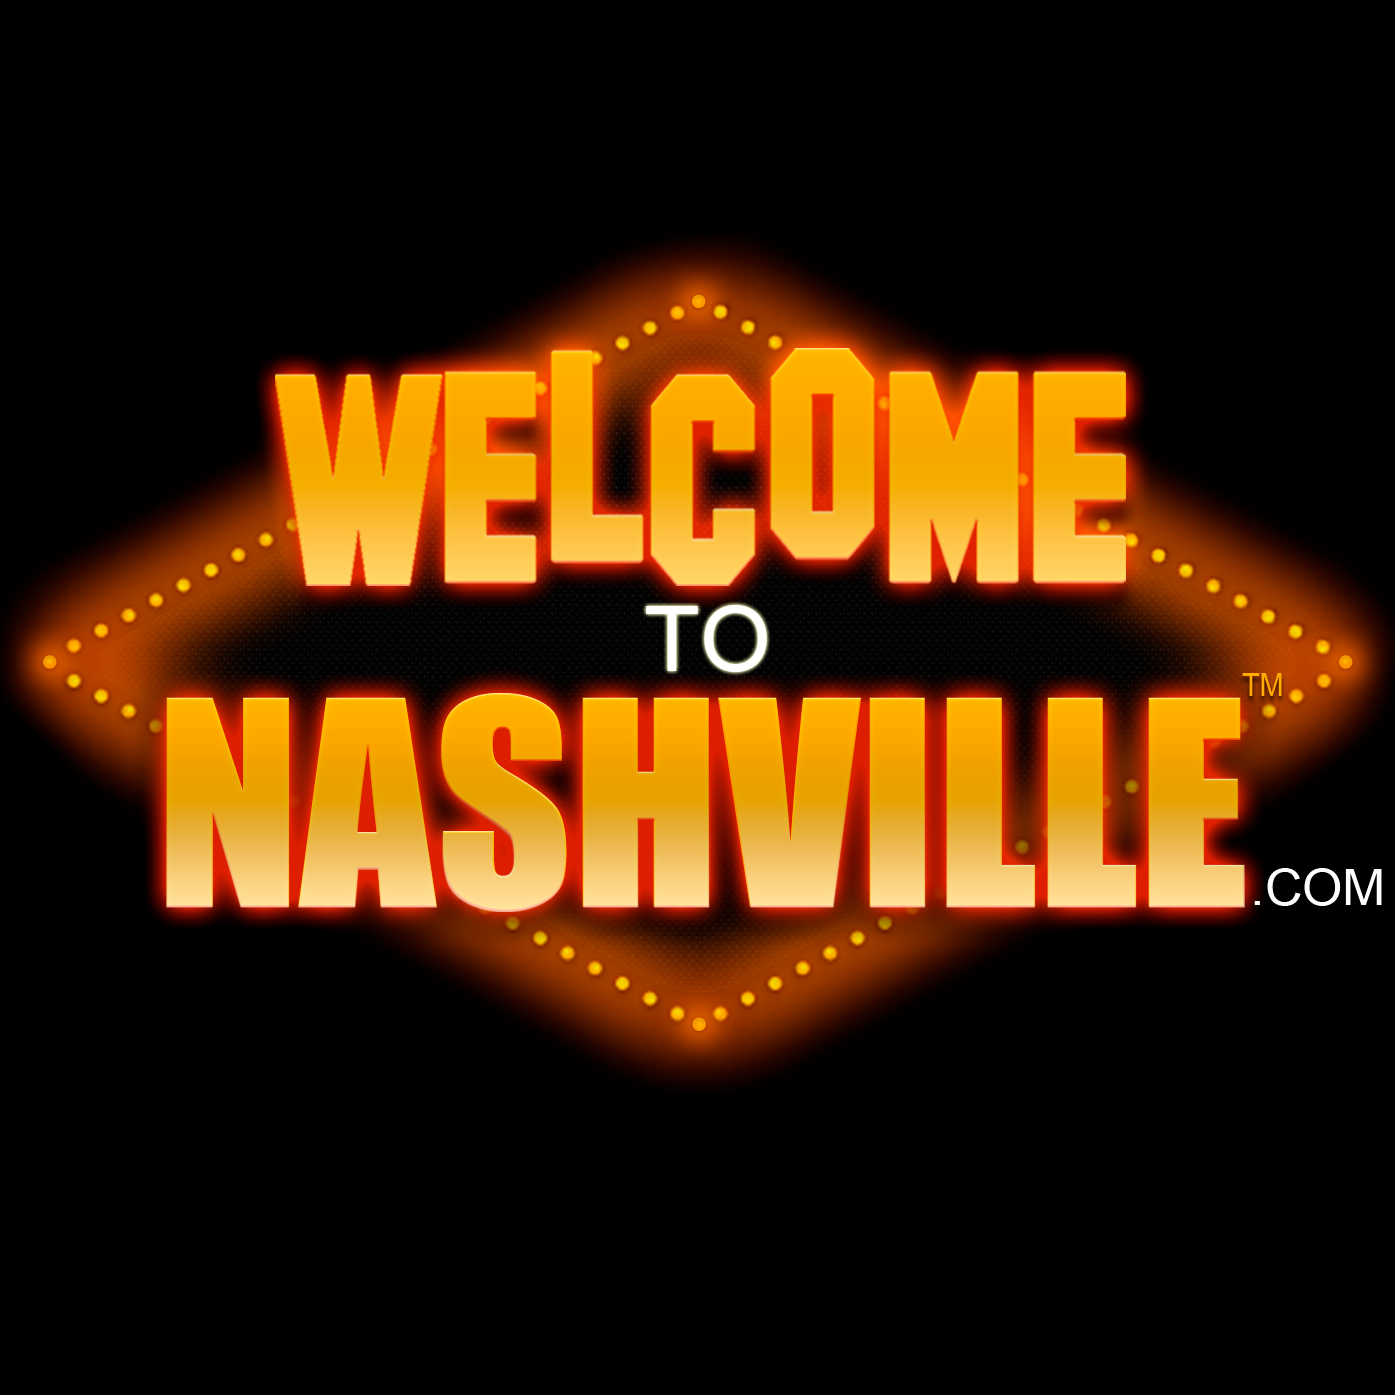 Welcome to Nashville